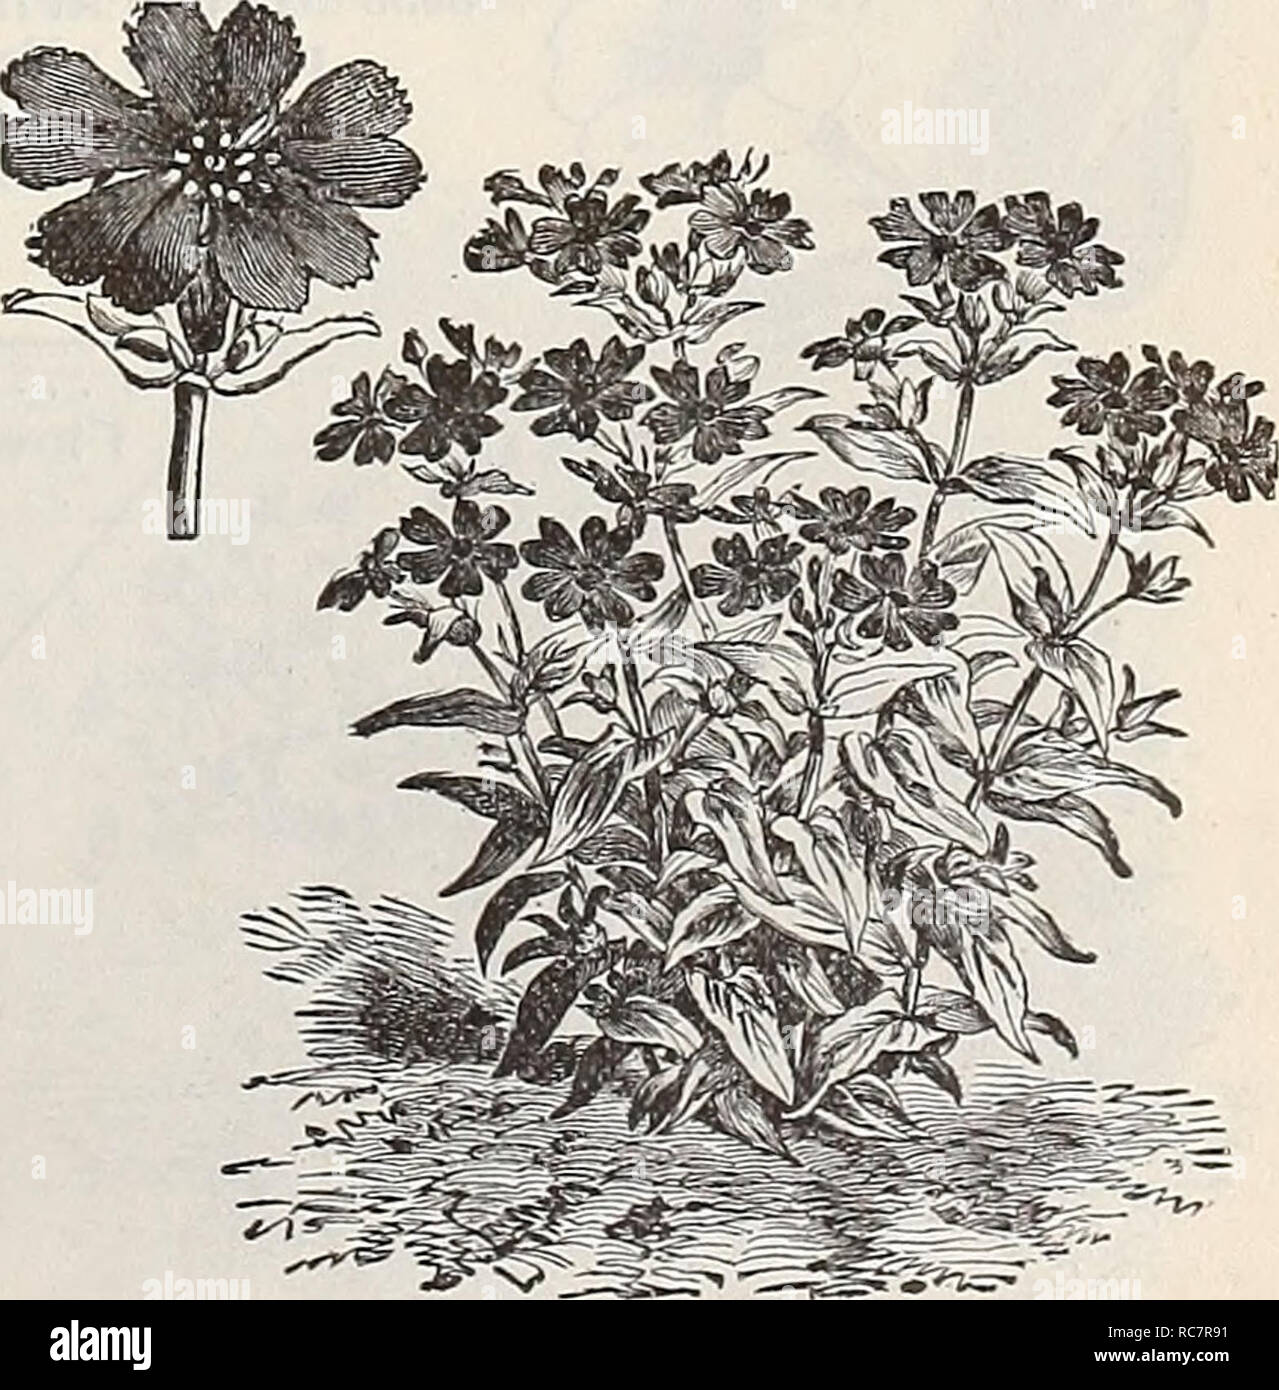 . Dreer's garden calendar : 1896. Seeds Catalogs; Nursery stock Catalogs; Gardening Equipment and supplies Catalogs; Flowers Seeds Catalogs; Vegetables Seeds Catalogs; Fruit Seeds Catalogs. Maurandi LINUM. One of the most effective and showy bedding plants, of long duration, having fine foliage and delicate stems. PER PKT. 6017 LinumCoCCineum. Brilliant scarlet crim- son ; hardy annual; 1 foot 5 6018 — Flavum. Golden yellow, perennial 5 LOPHOSPERMUM. Highly ornamental annual climber, with showy, fox- glove like flowers; 10 feet. (See cut.) 6035 Liophospermum Scandens. Rosy pur- ple 10 I.UPINUS Stock Photo